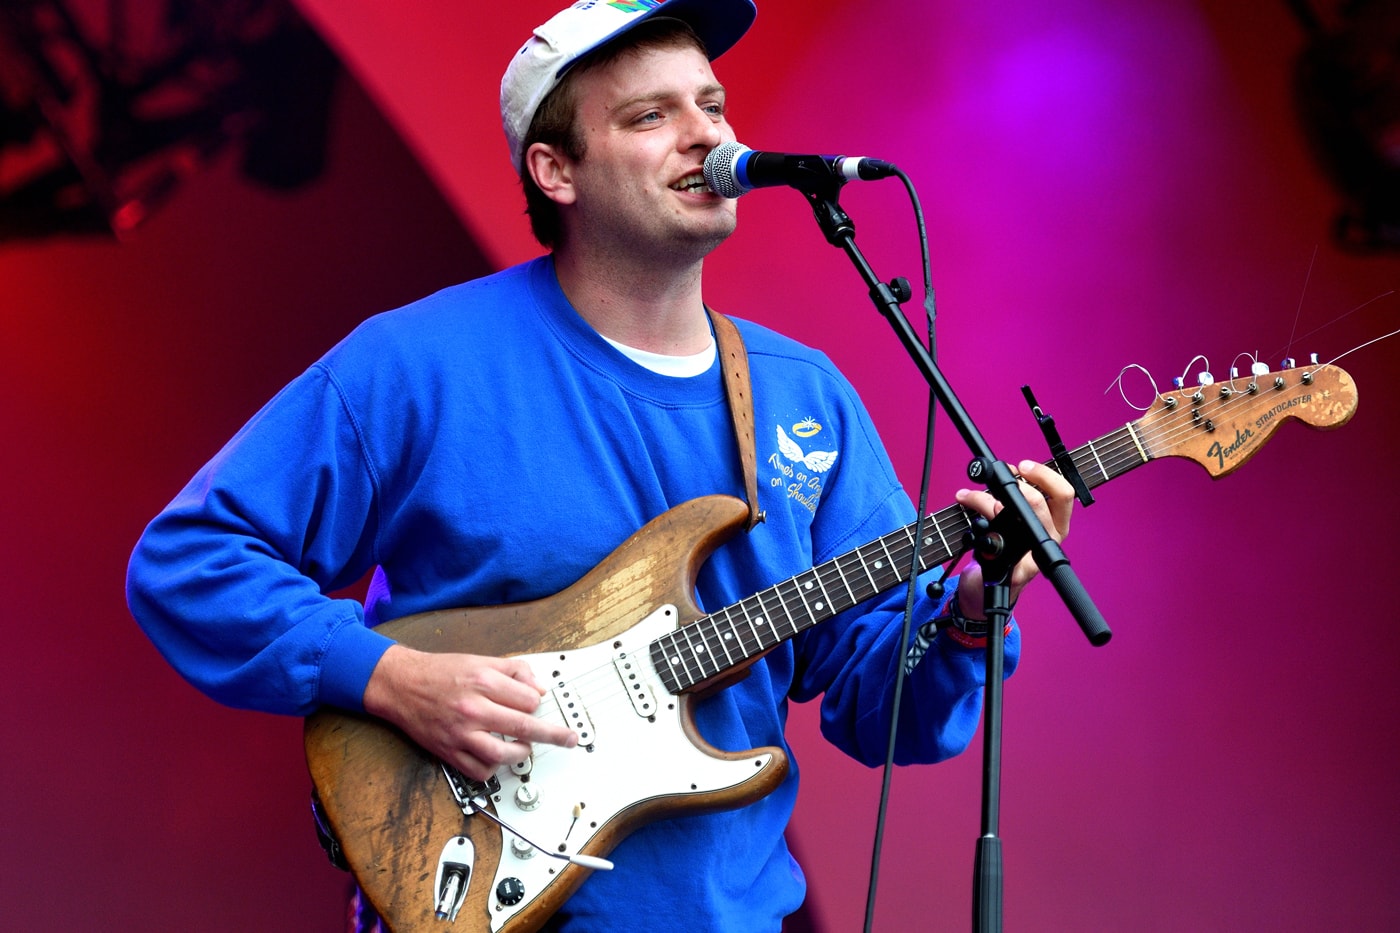 Mac DeMarco Shares Unreleased Song, “Missing The Old Me”